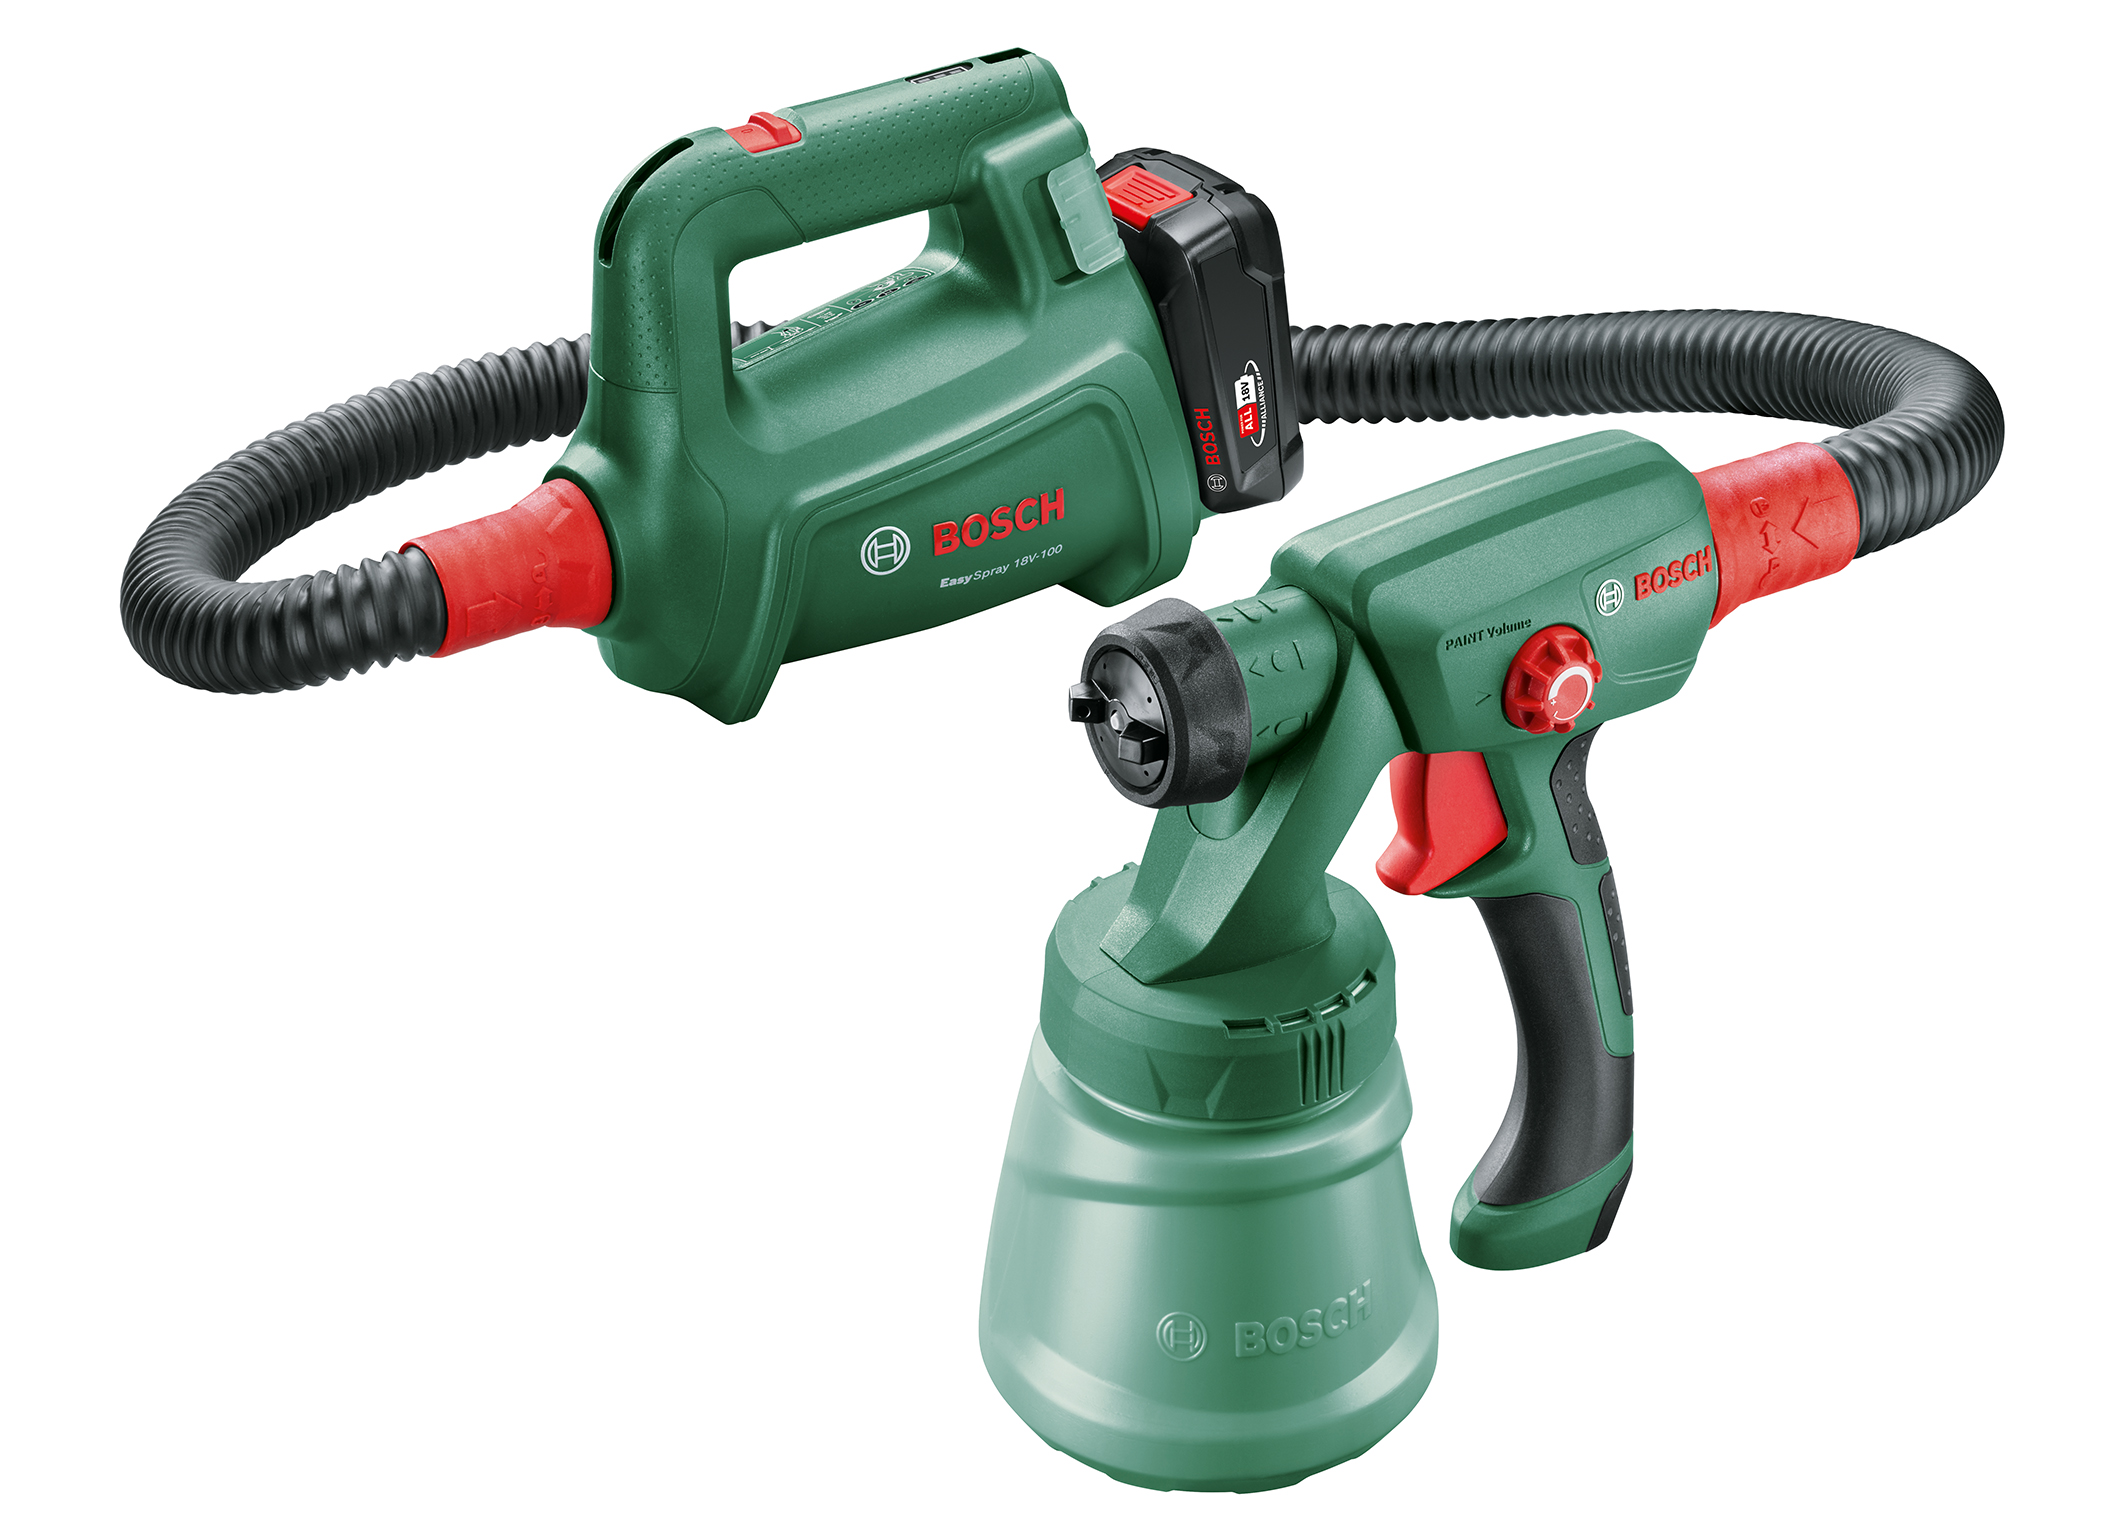 Strong addition in the “18V Power for All System”: First cordless paint spray system from Bosch for DIYers